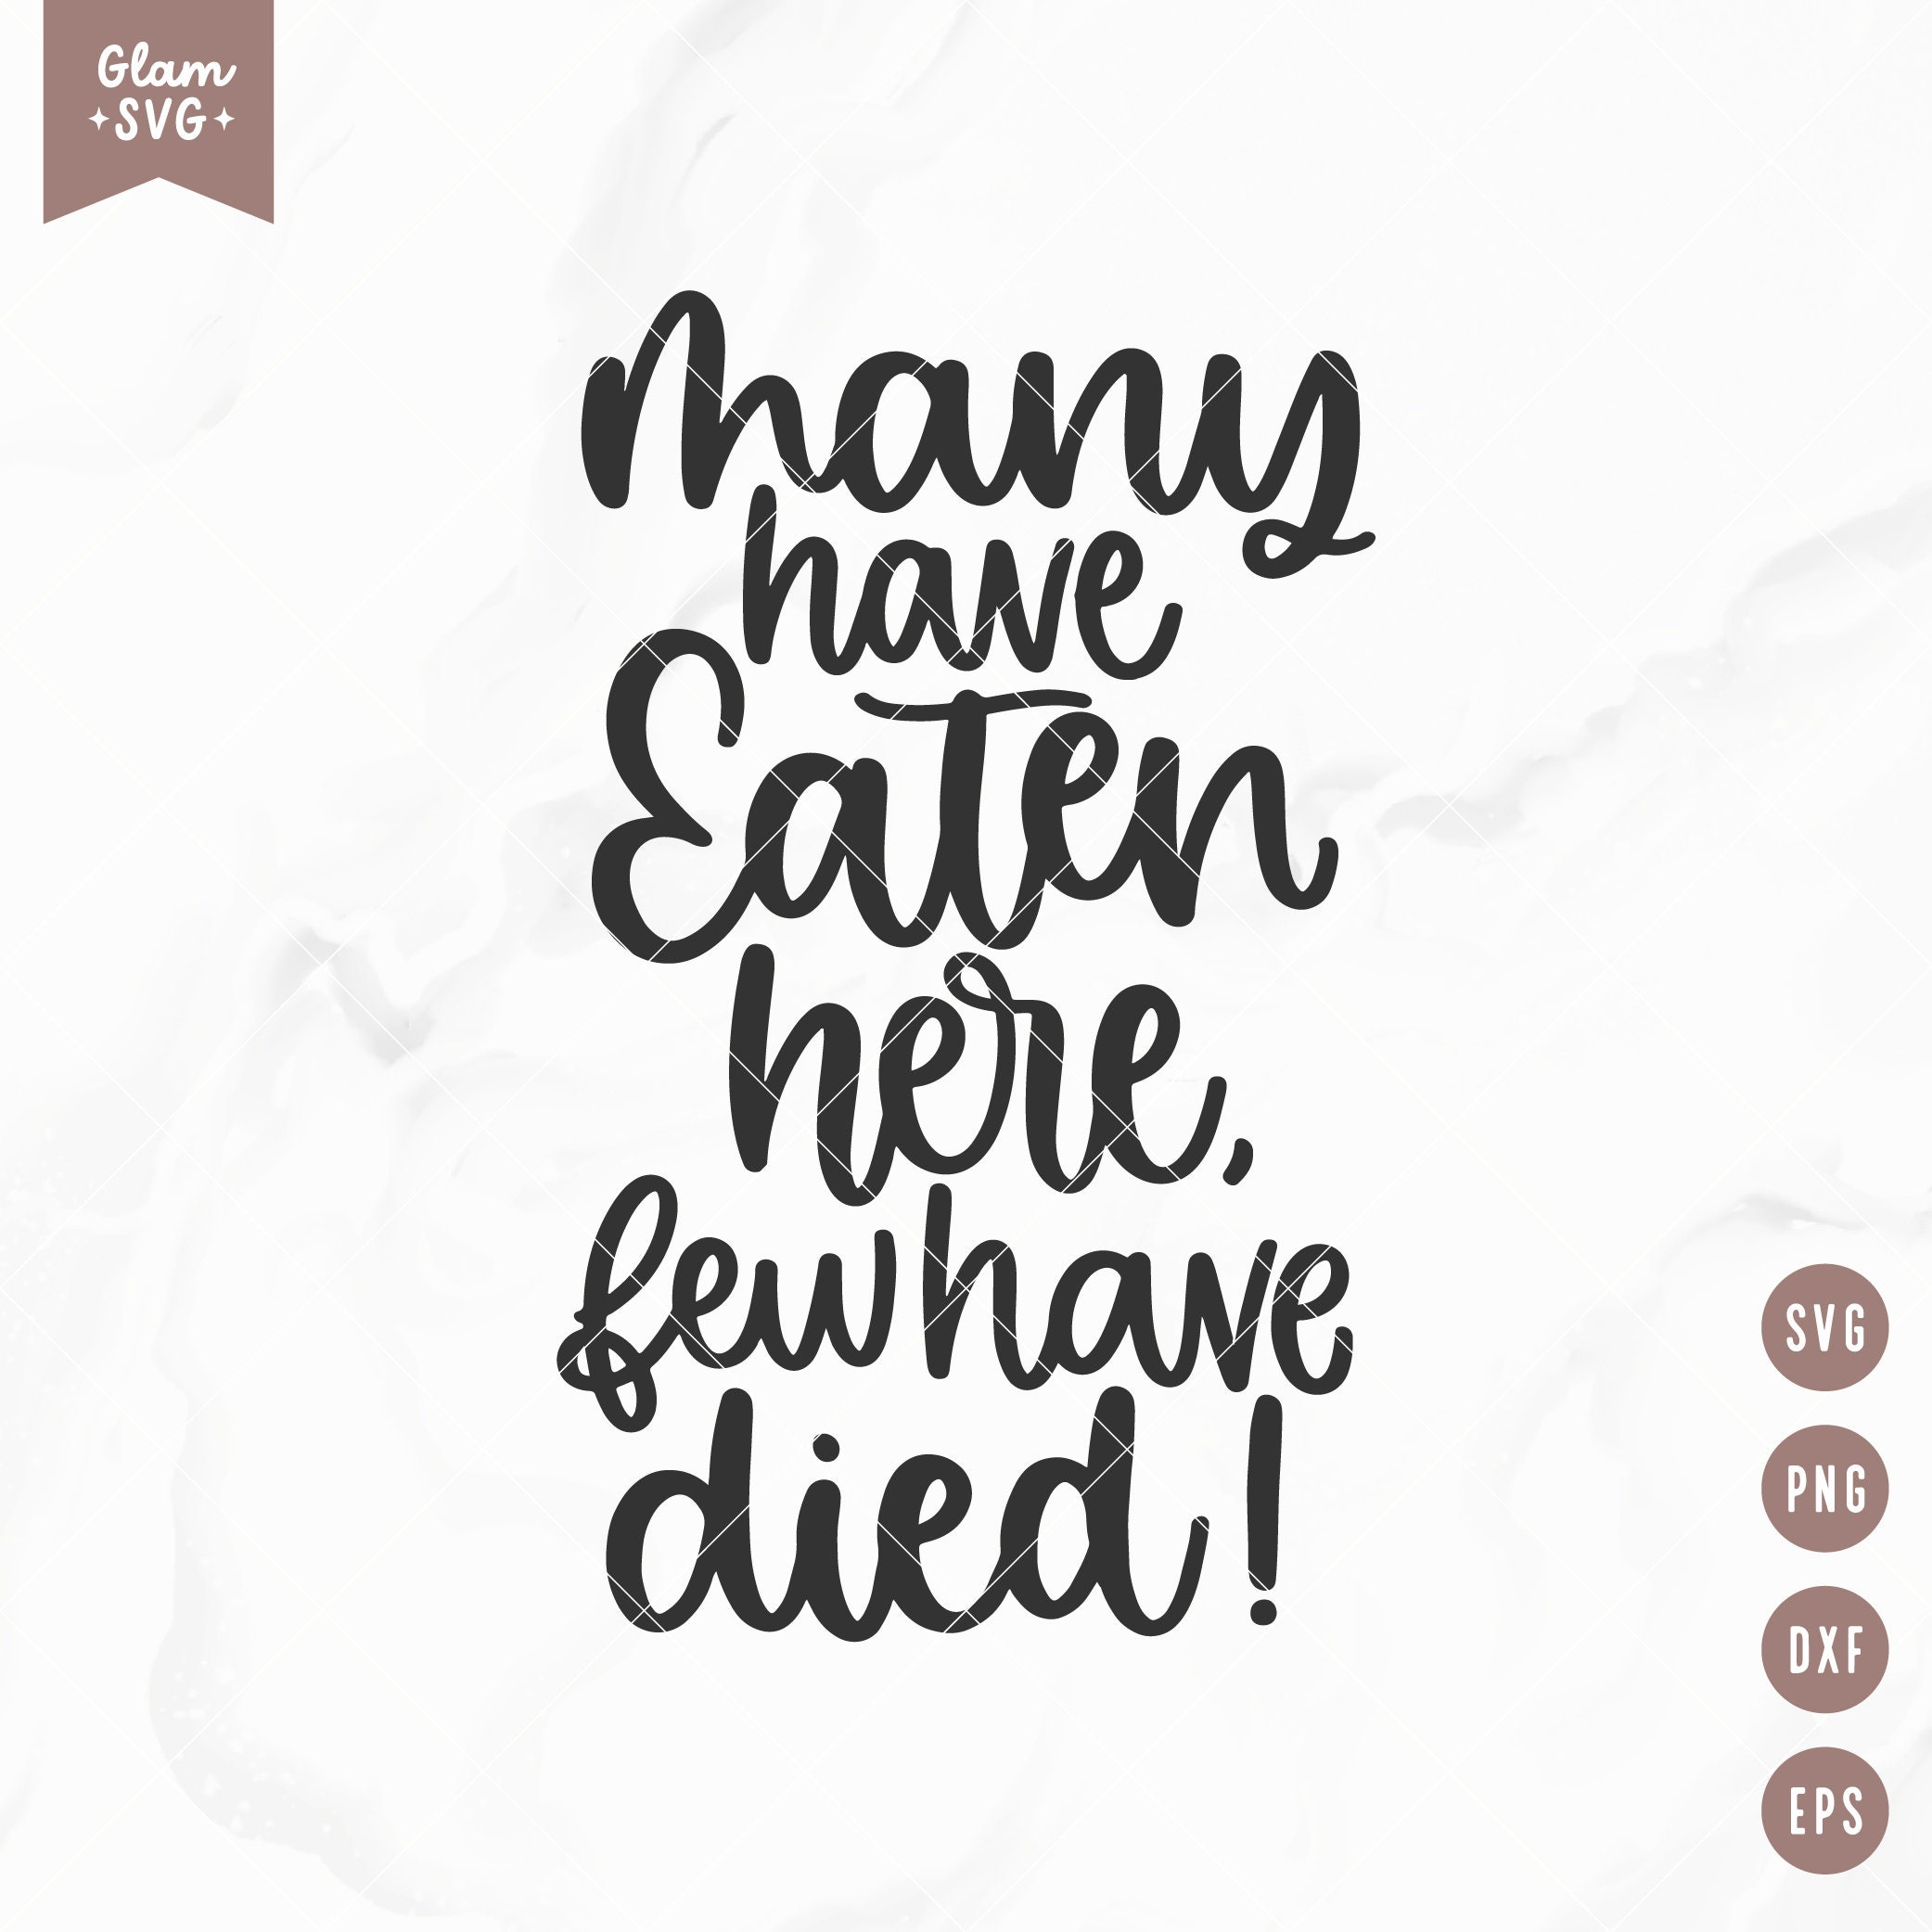 Few Have Died Svg - Etsy